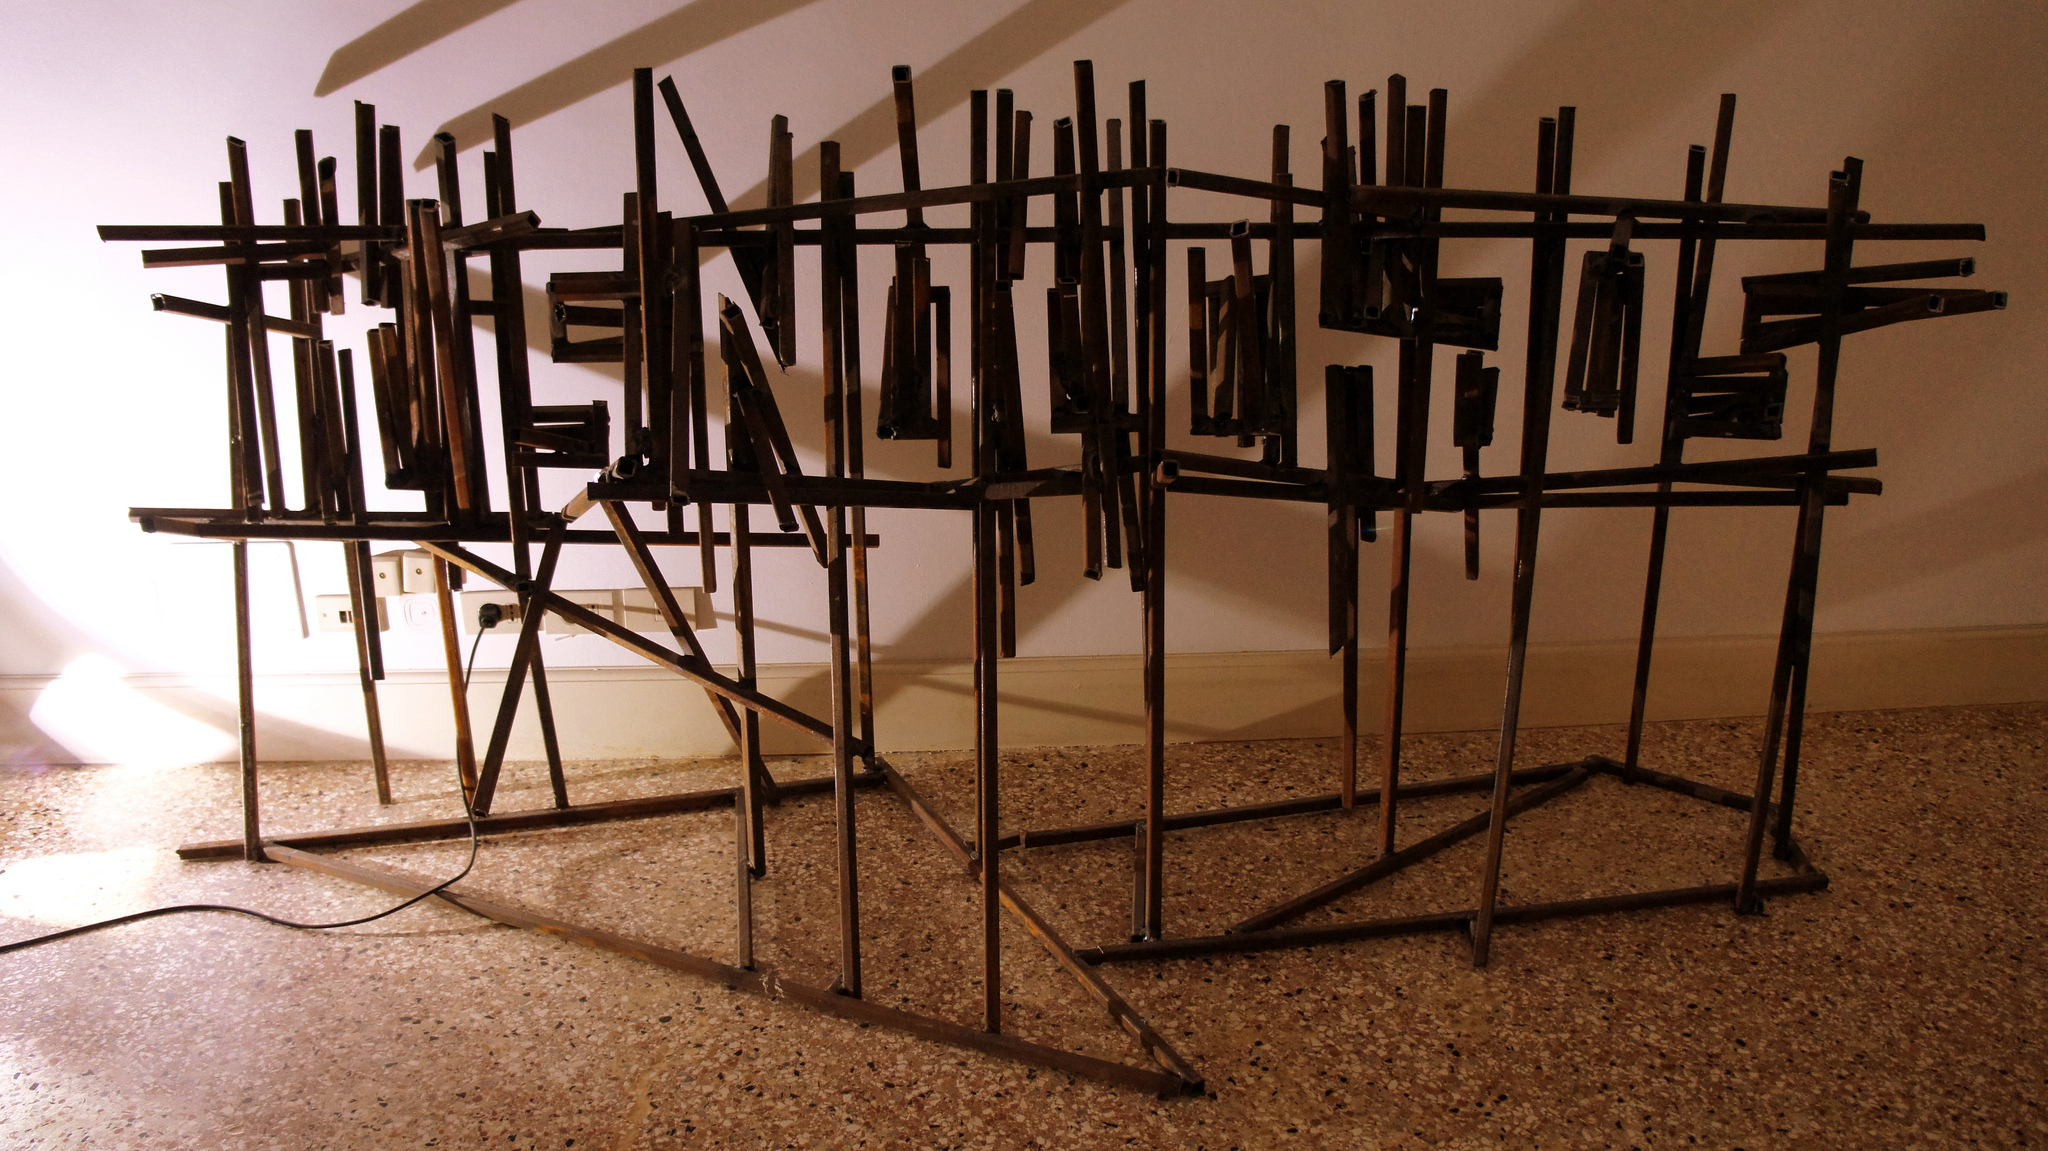 Art on display at the 55th Venice Biennale | Photo by 